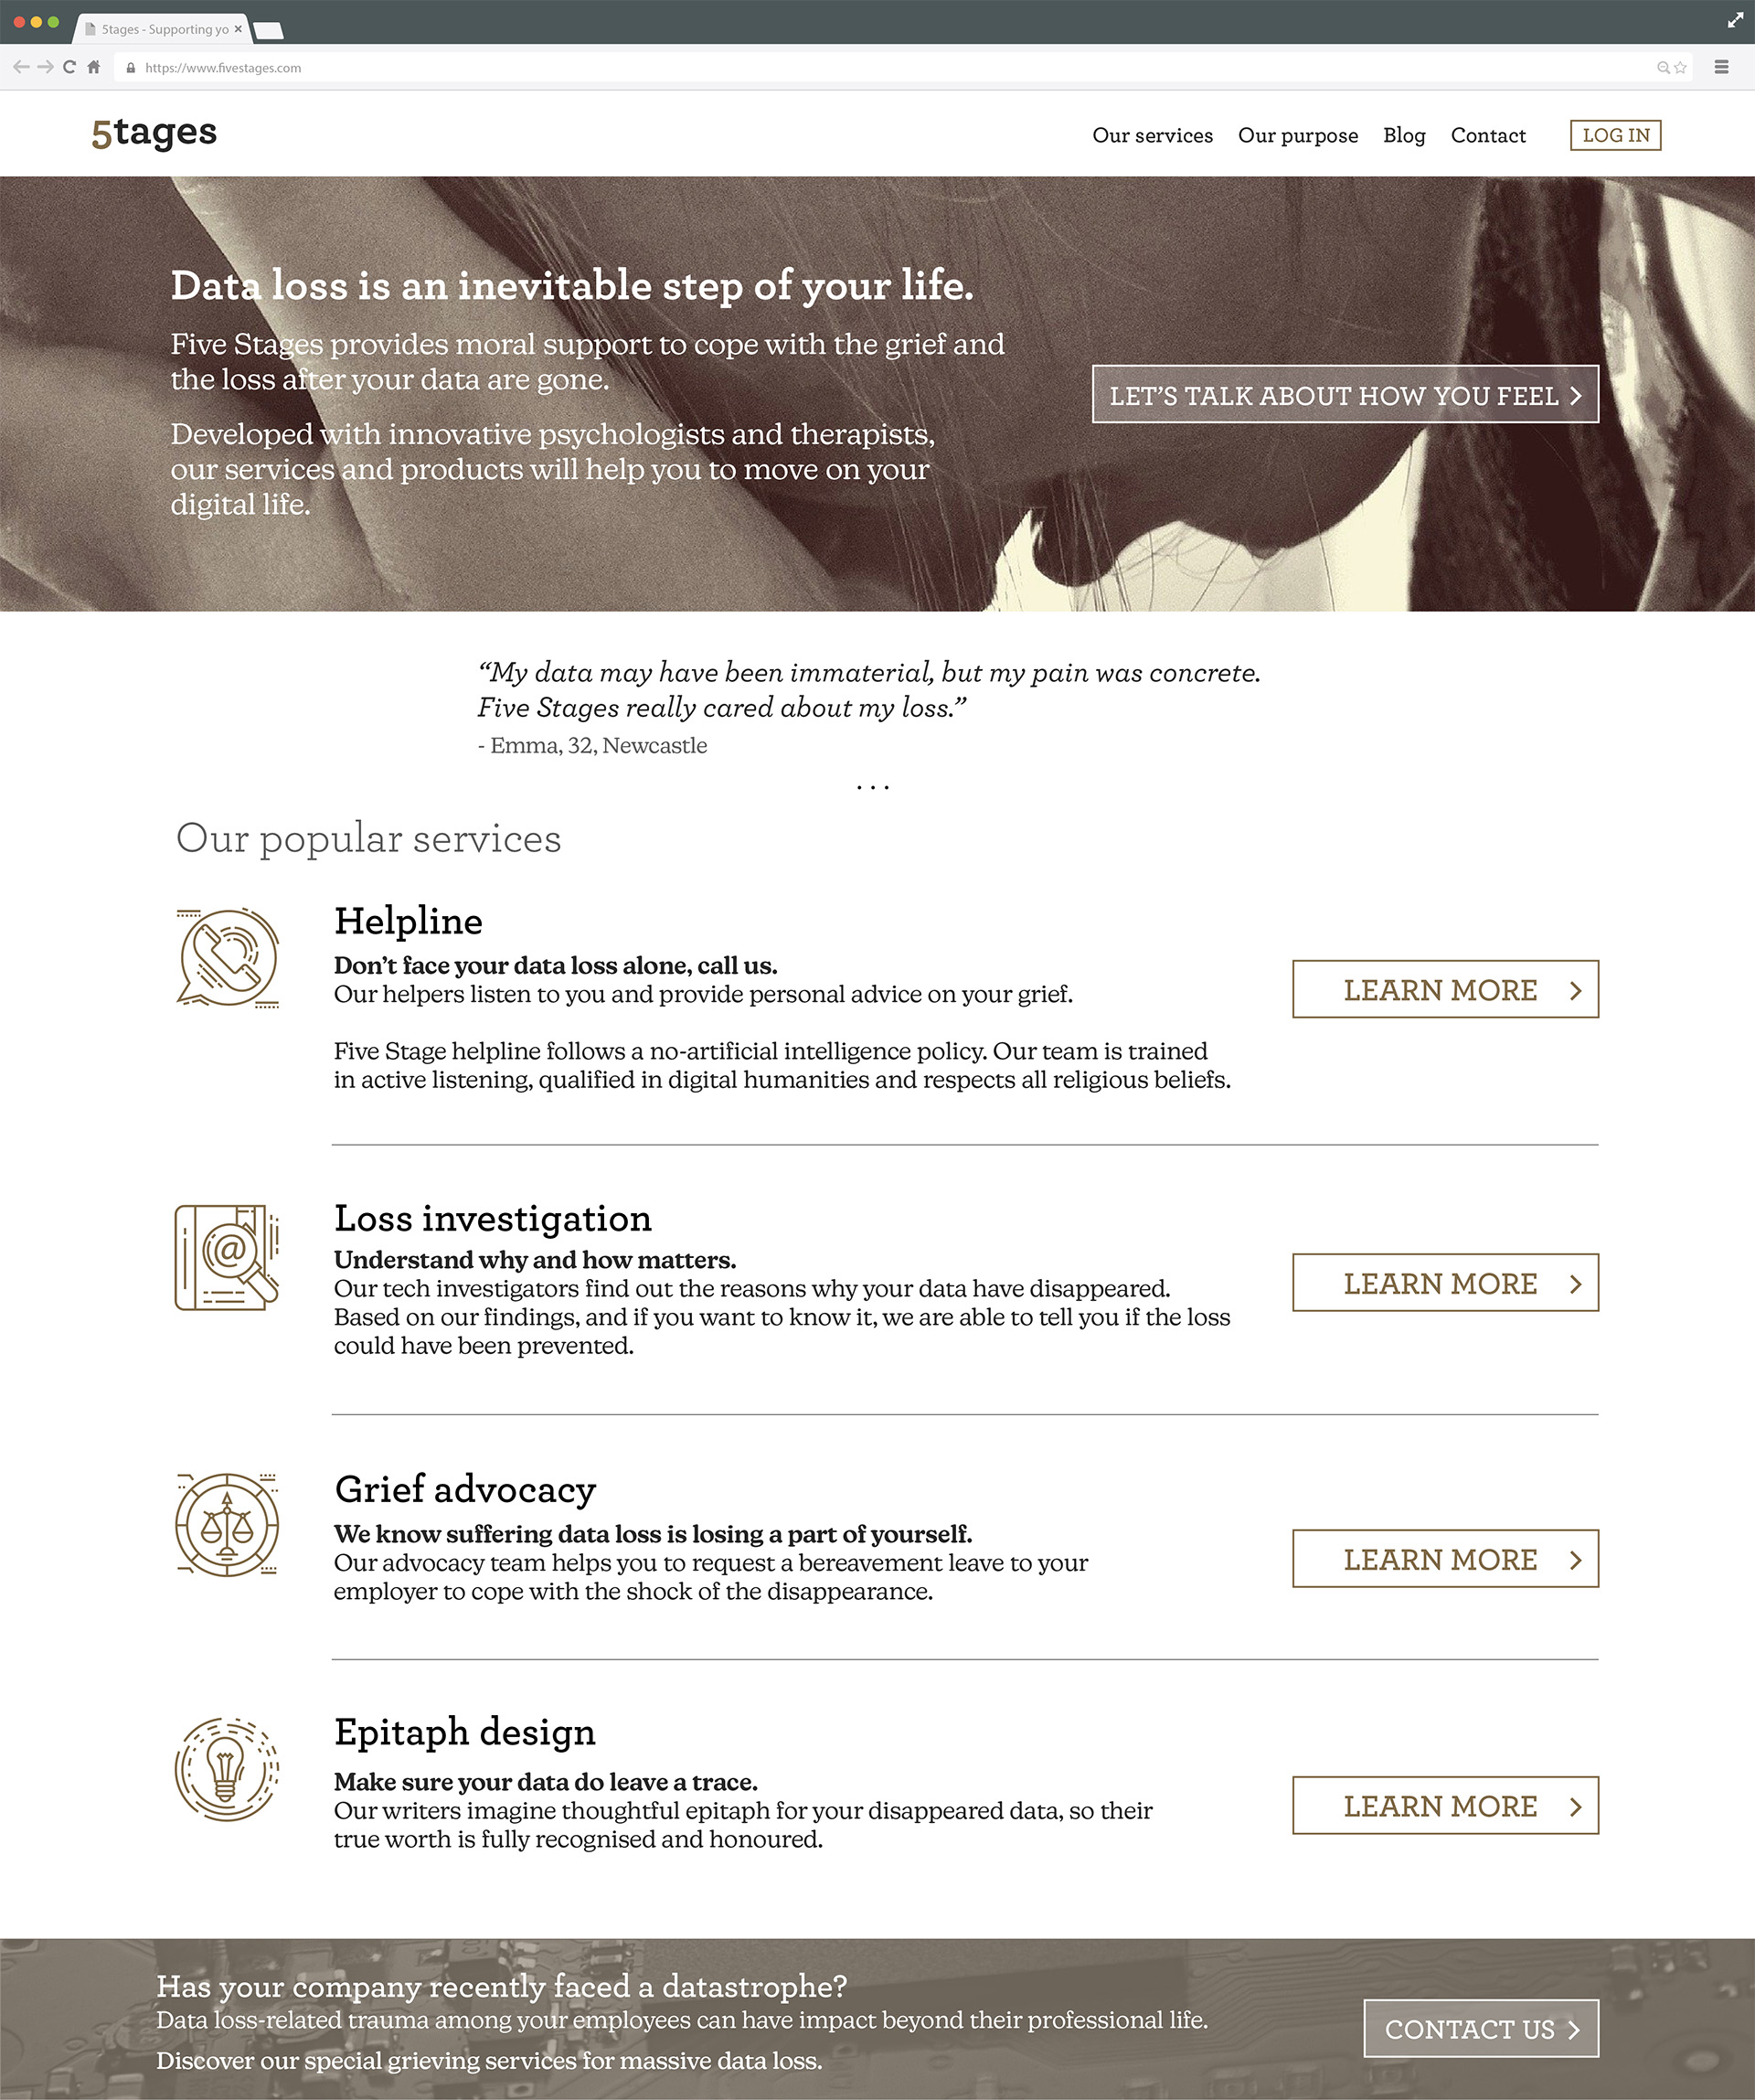 The landing page of 5stages, a startup moral support to cope with the grief and the loss after one's data are gone.